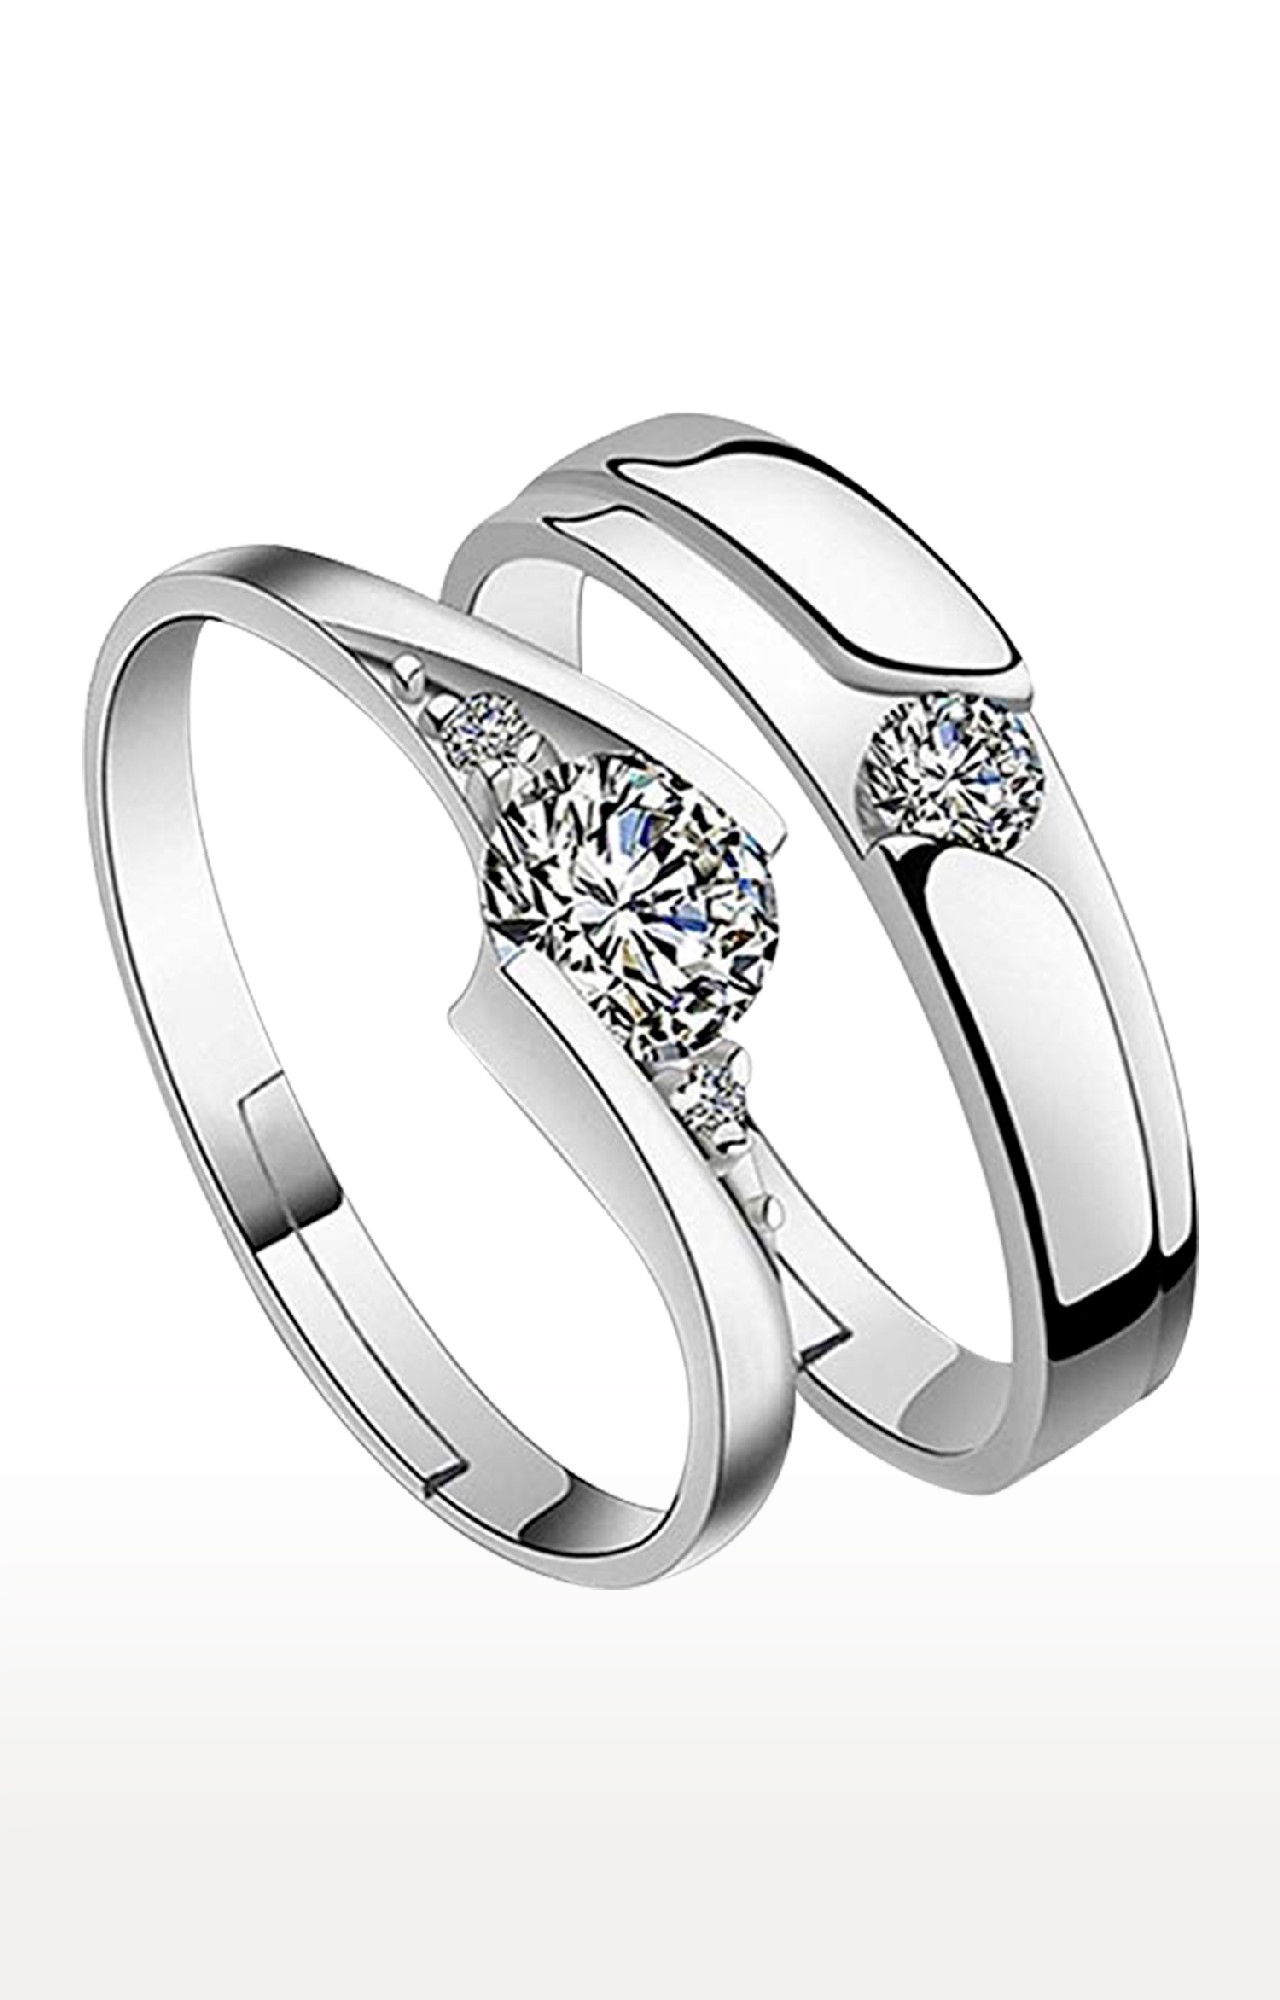 Karishma Kreations Adjustable Couple Rings for lovers valentine gift set  Stainless Steel Ring Set Brass, Stainless Steel, Brass Cubic Zirconia  Rhodium, Silver, Titanium Plated Ring Set Price in India - Buy Karishma